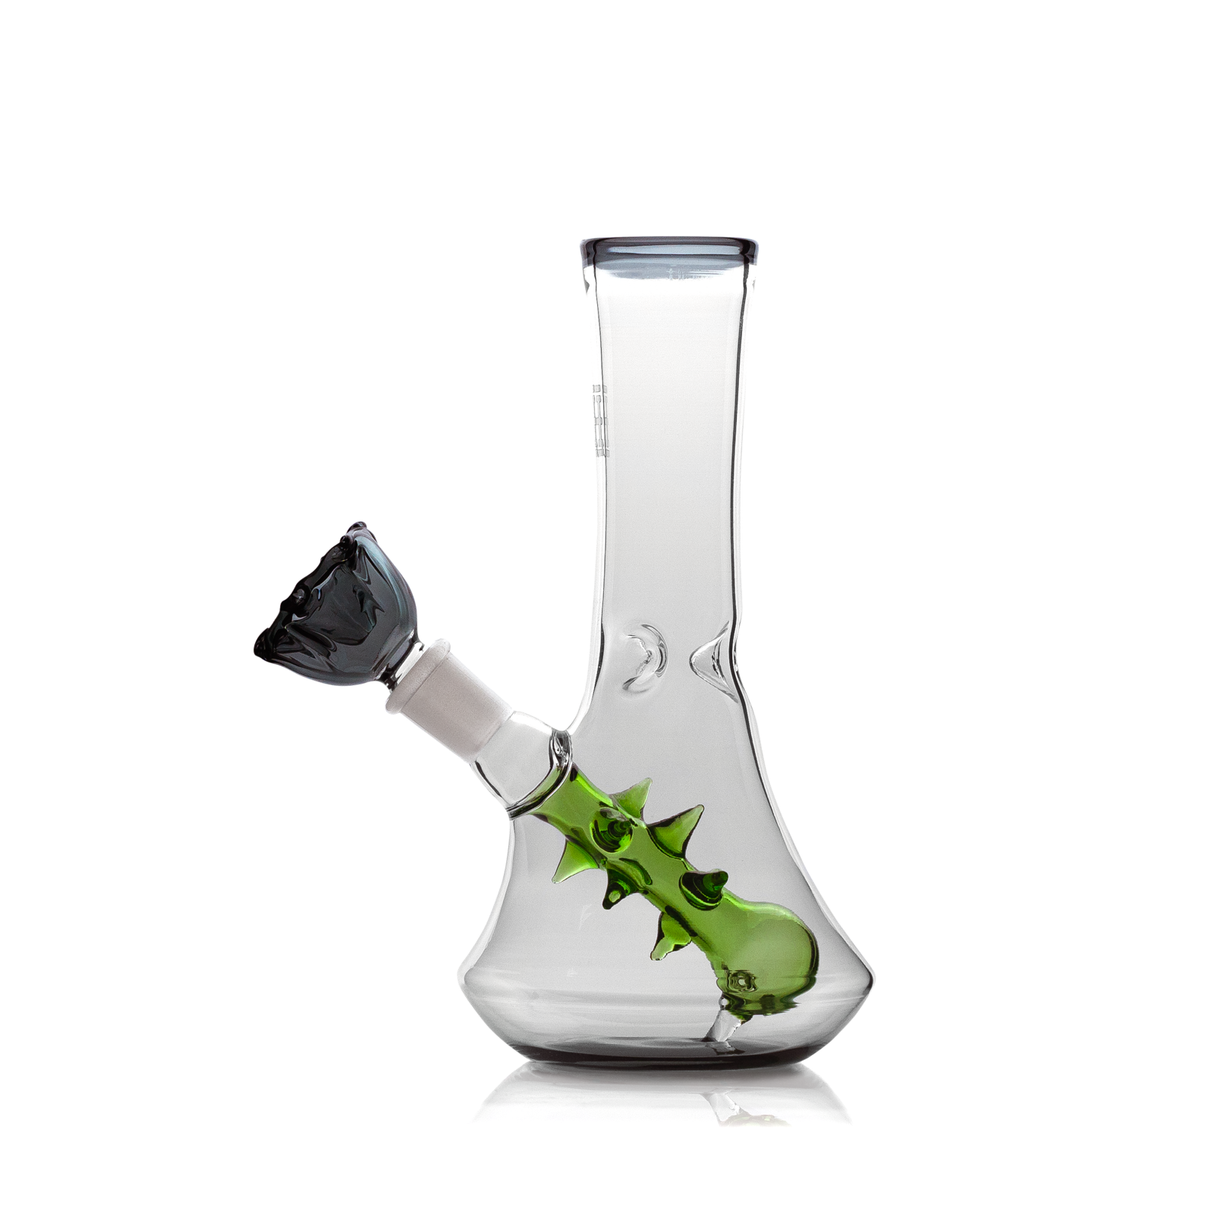 Hemper Flower Vase Bong front view with glass-on-glass joint and decorative accents